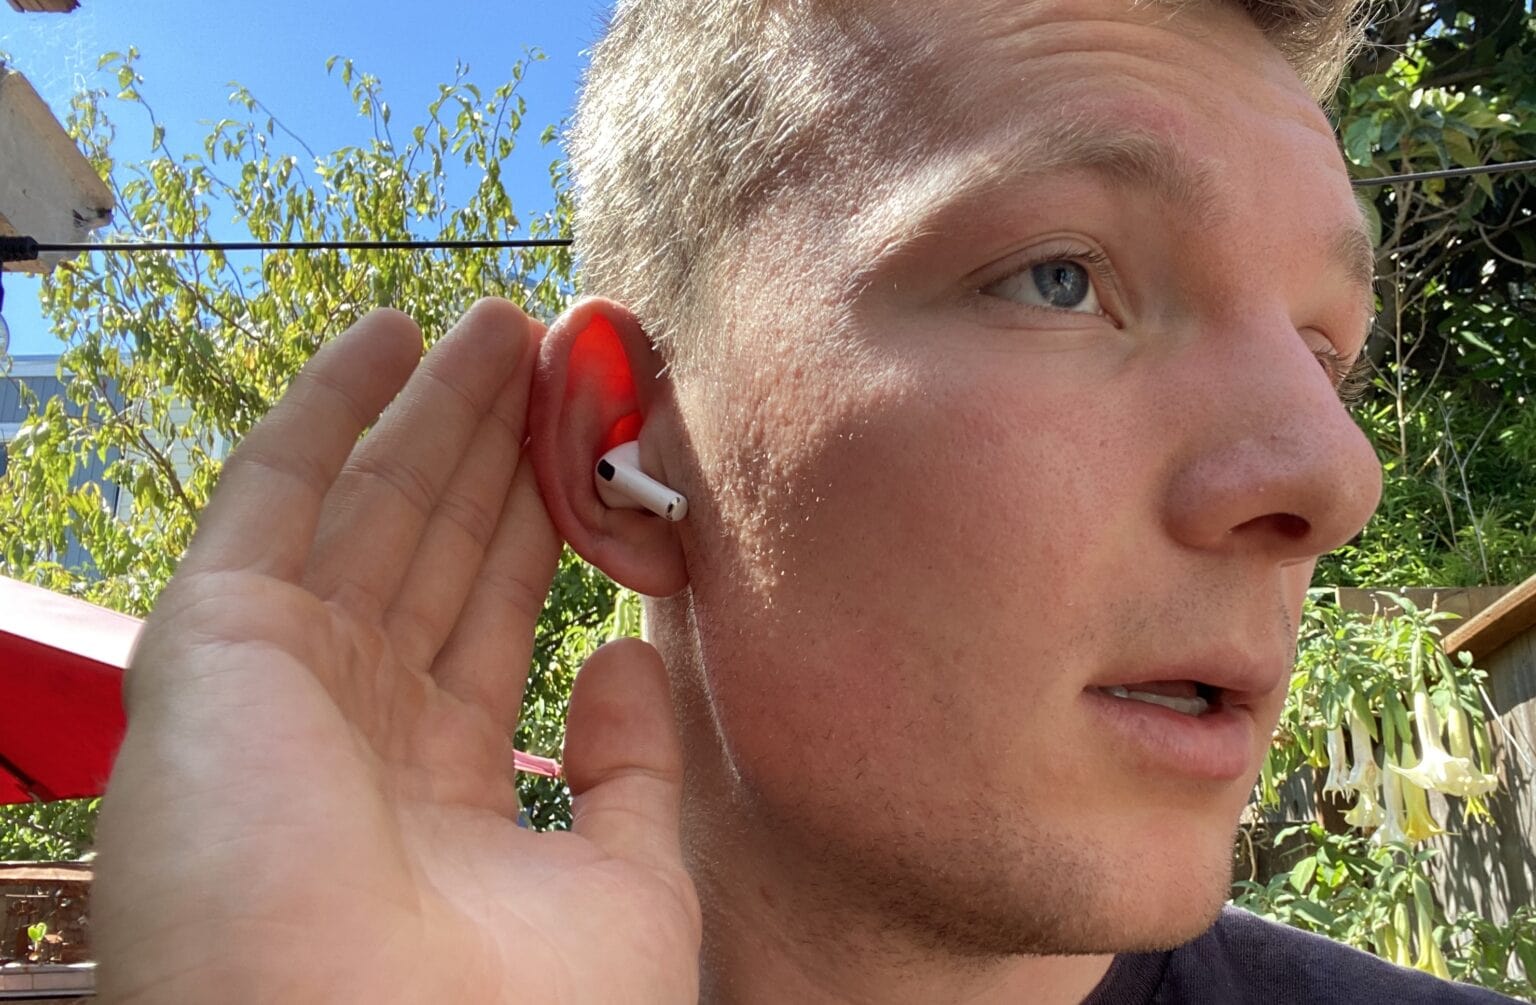 From iPhoneIslam.com, A young man inserts red AirPods 4 into his ear, with a sunny outdoor background featuring green foliage.